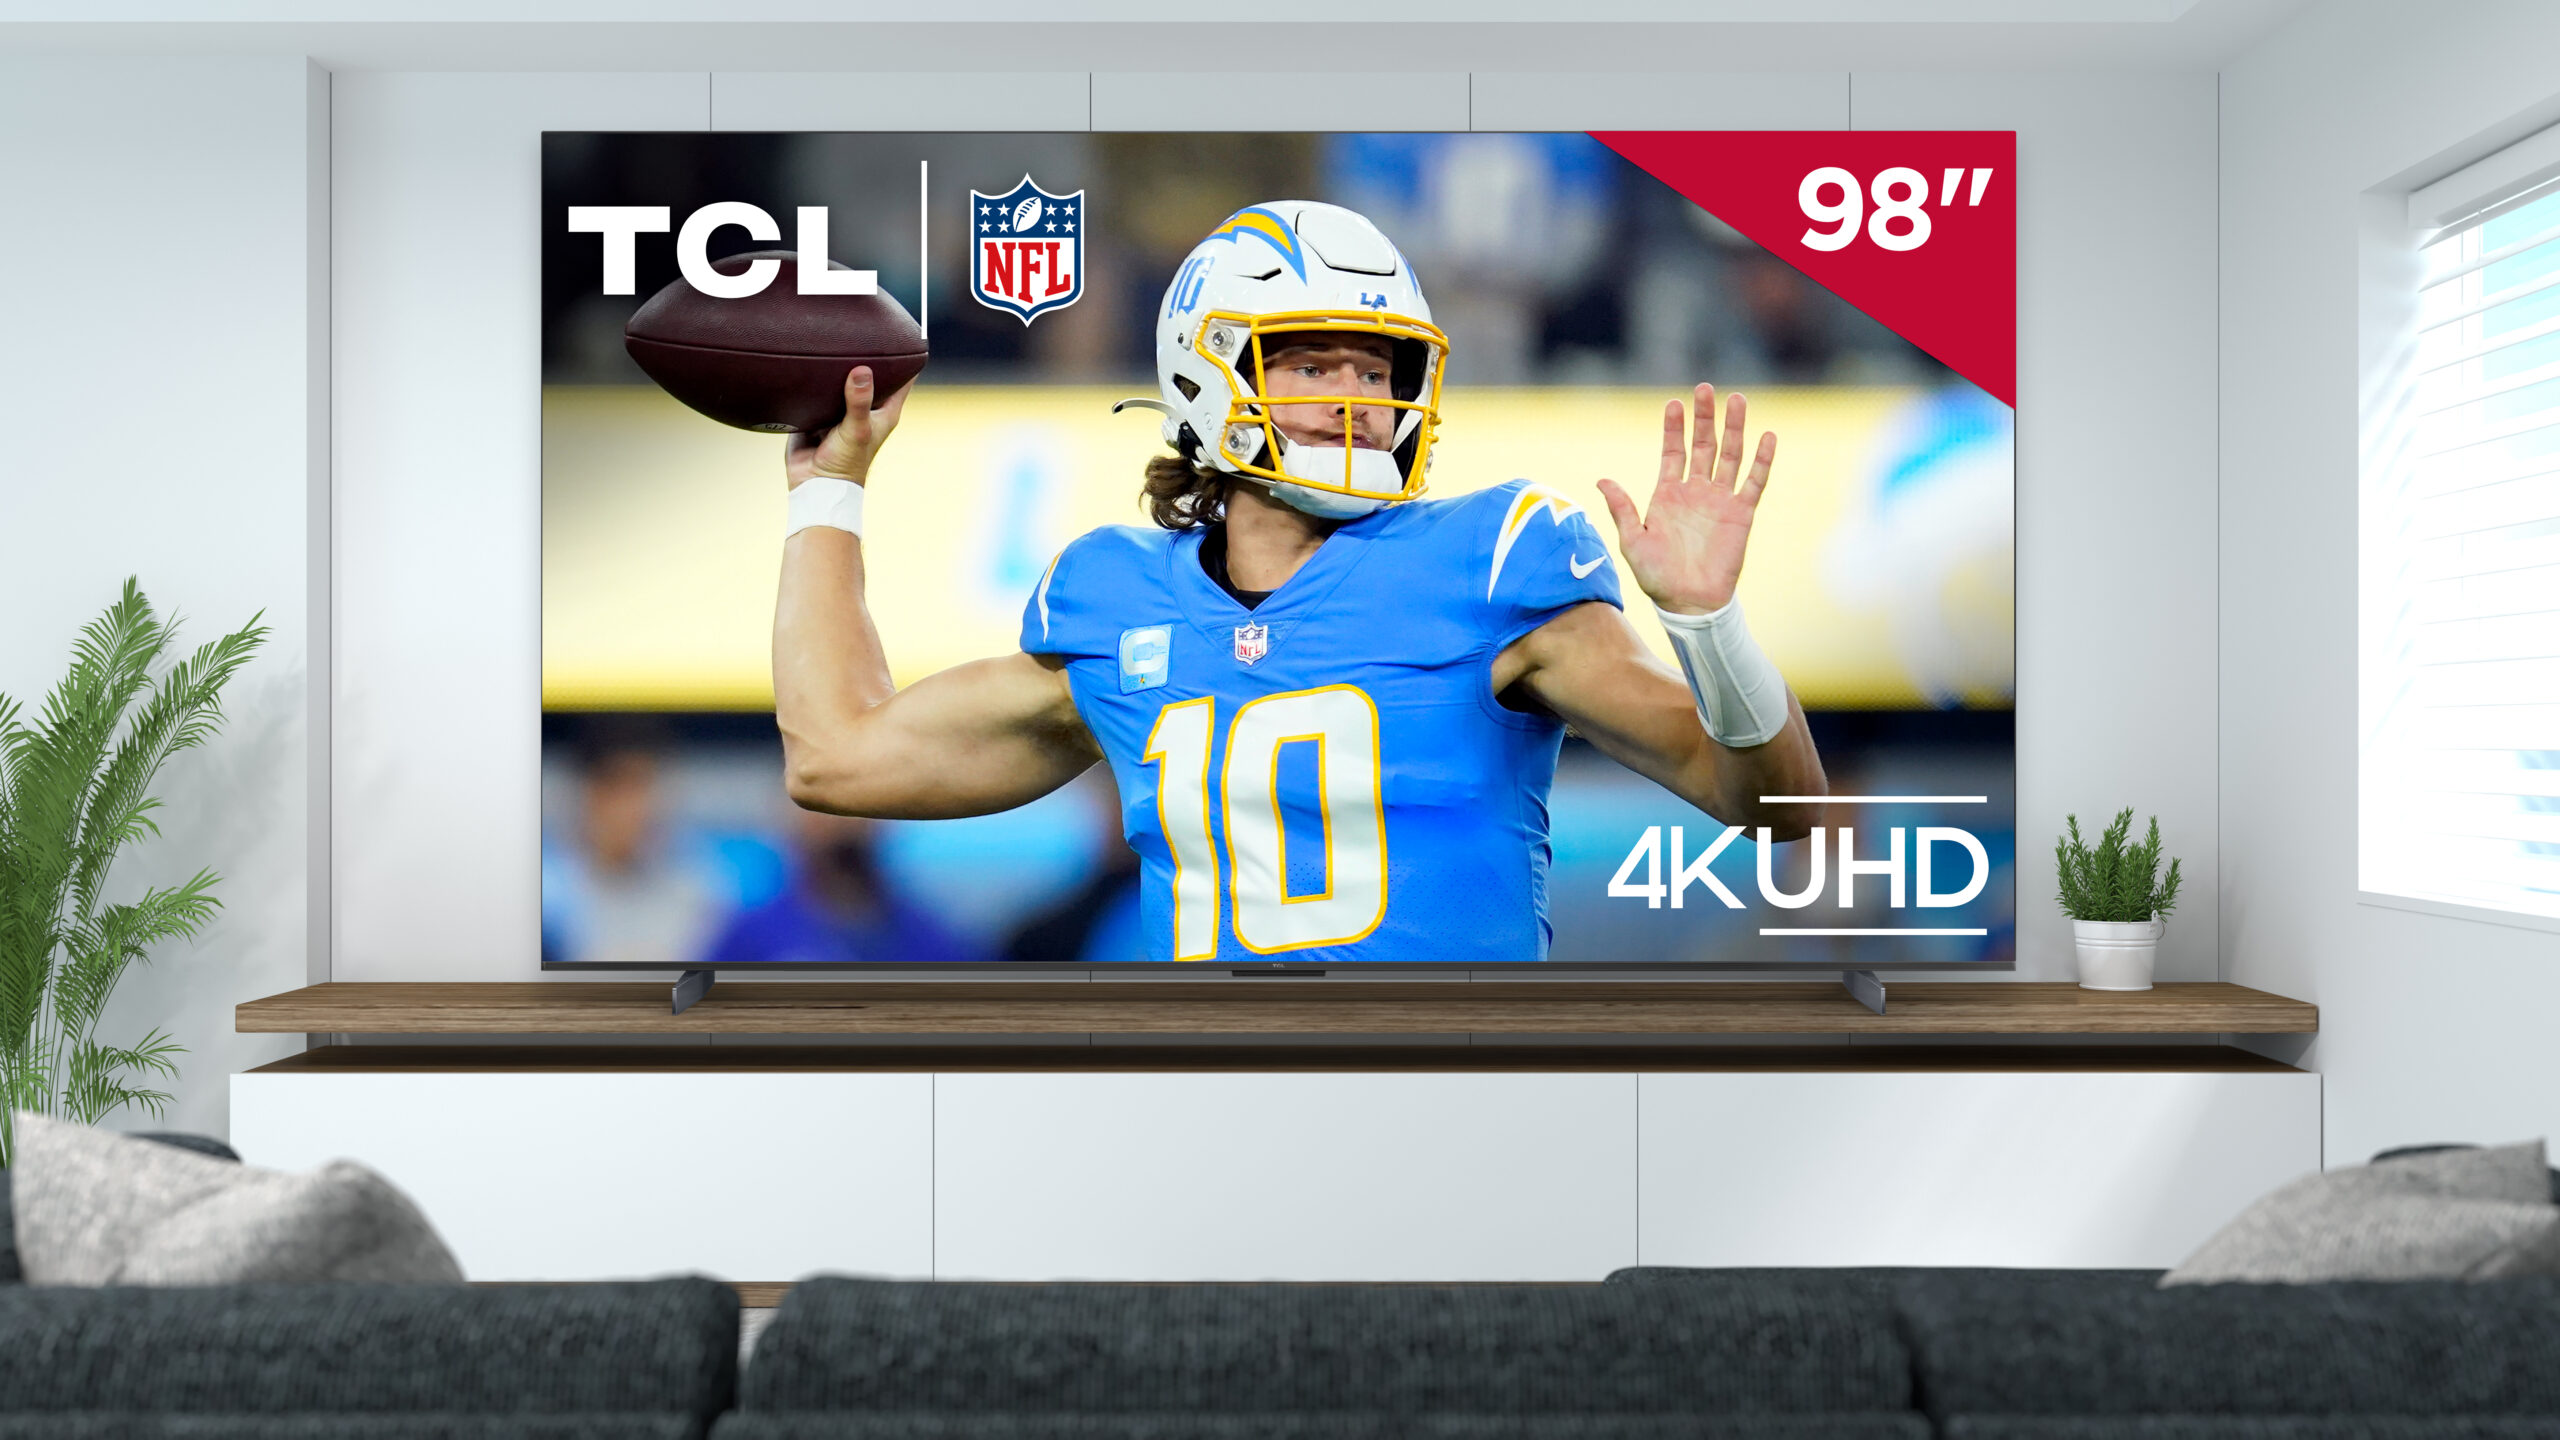 TCL's New 98-Inch S5 TV Is Available With NFL Sunday Ticket Deal